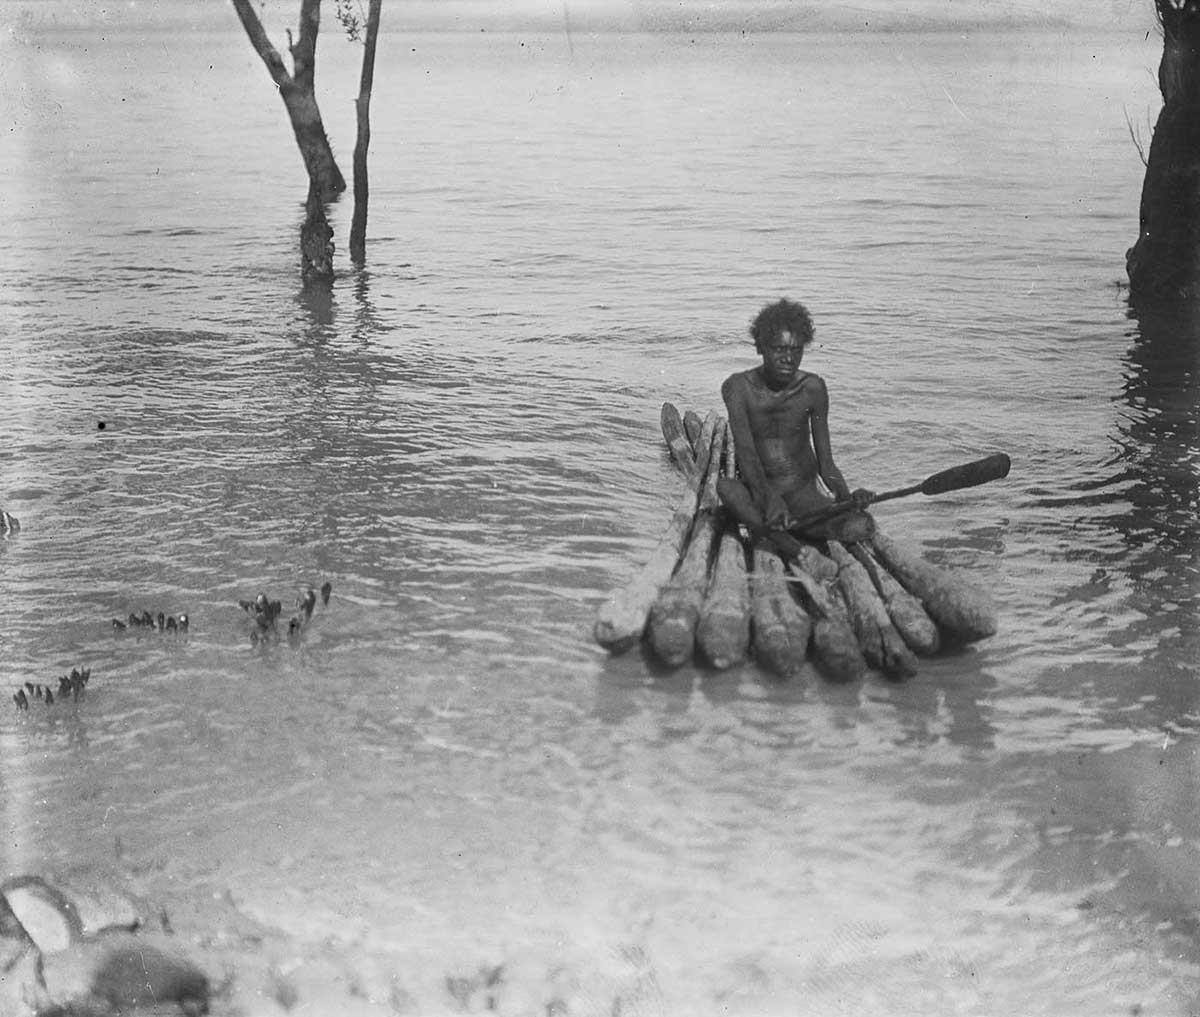 Black and white photograph of a man sitting on a raft on a body of water. - click to view larger image